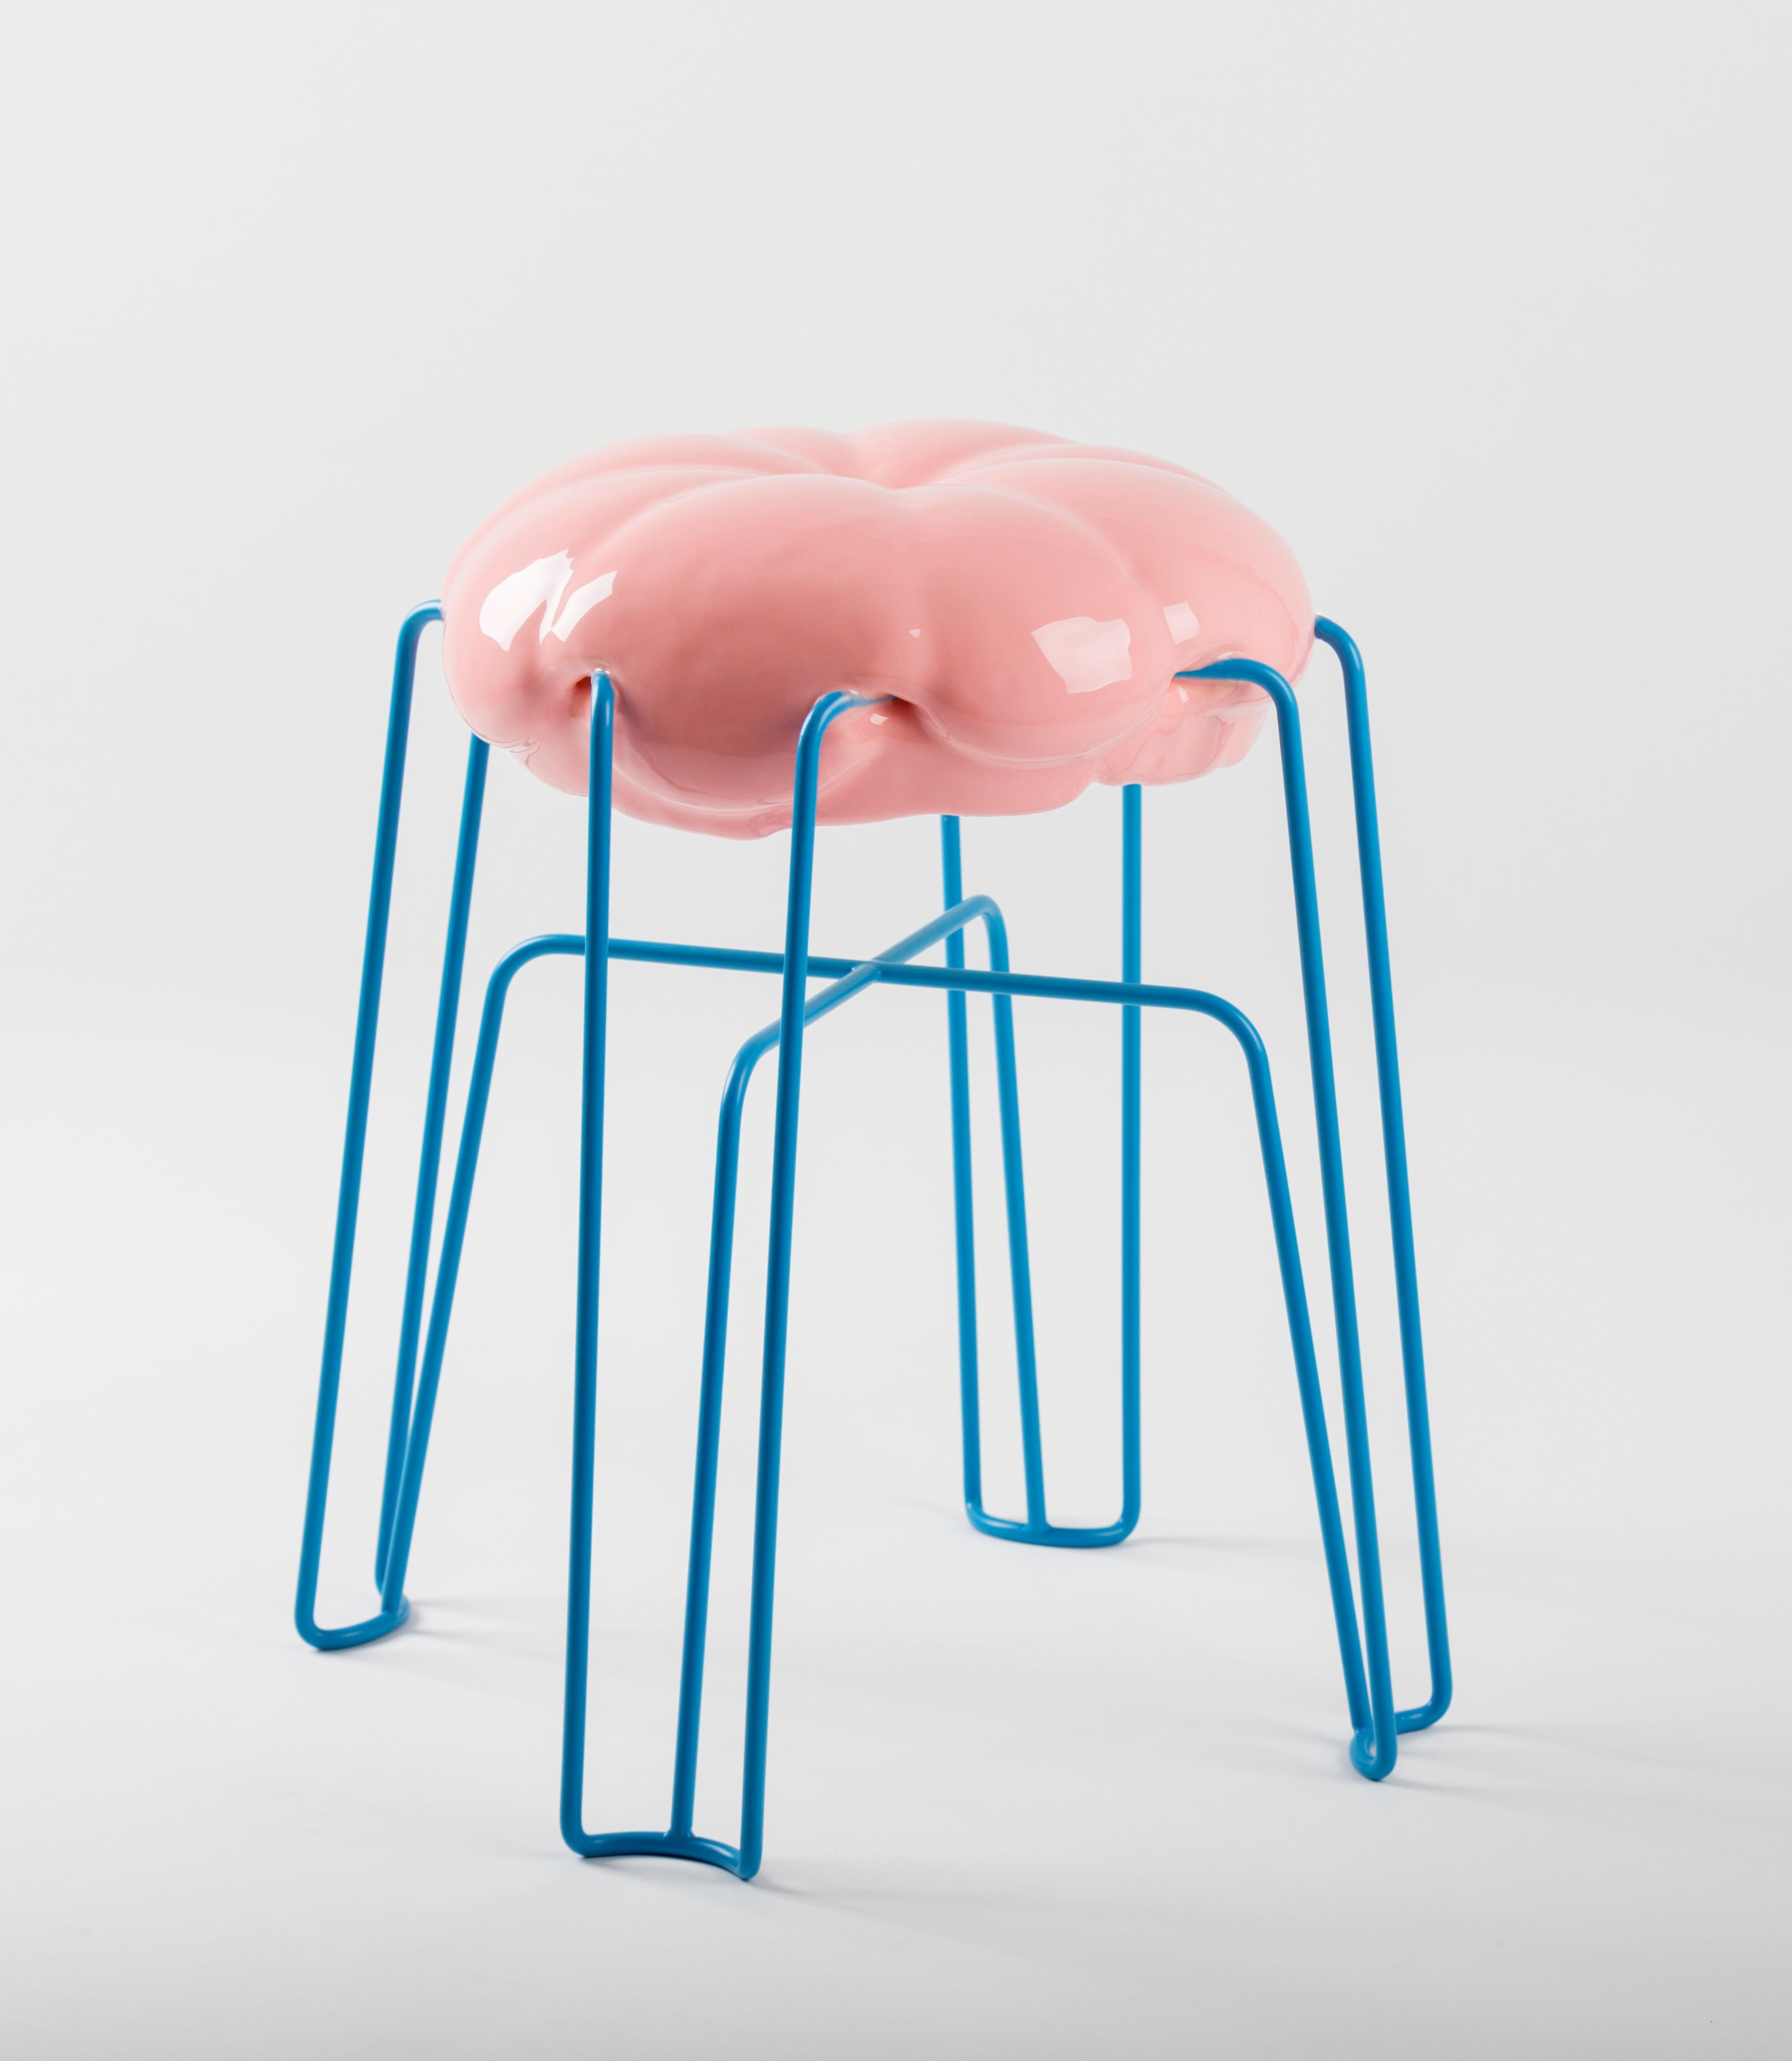 Marshmallow Stool by Paul Ketz in Plum Polyurethane Foam and Steel In Excellent Condition For Sale In New York, NY